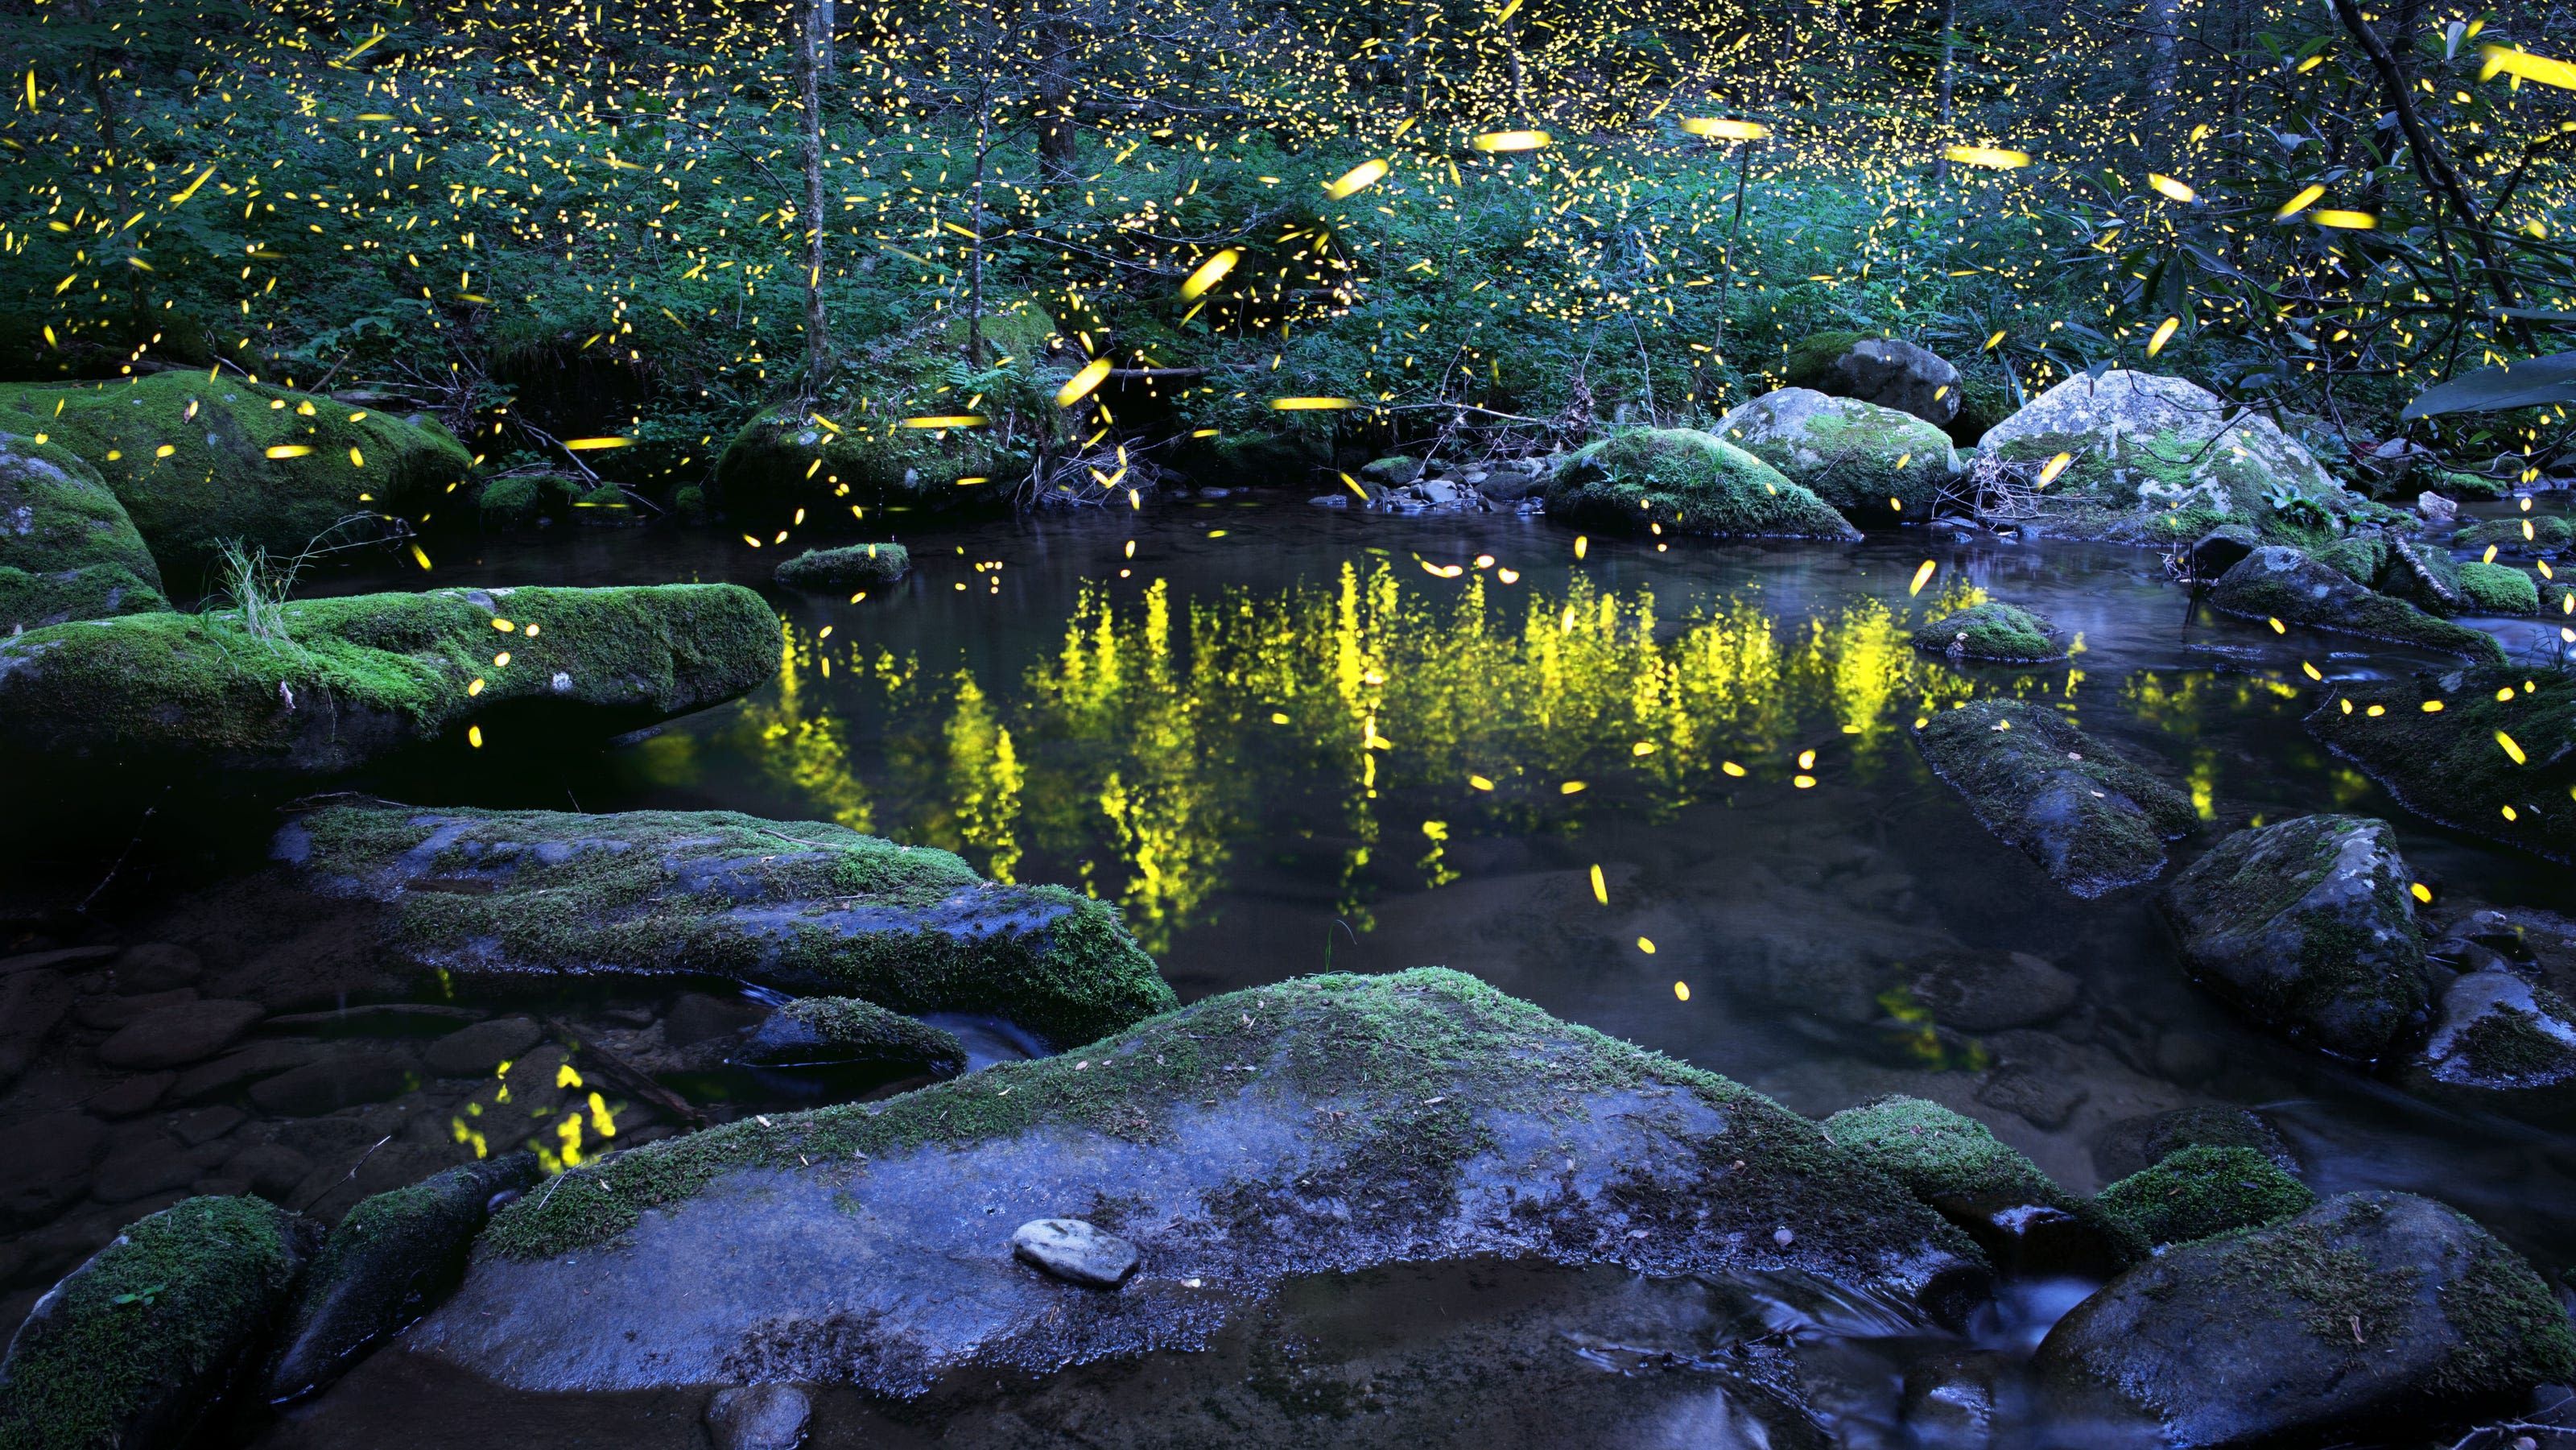 How to see synchronous fireflies in Great Smoky Mountains: 2024 lottery, dates announced